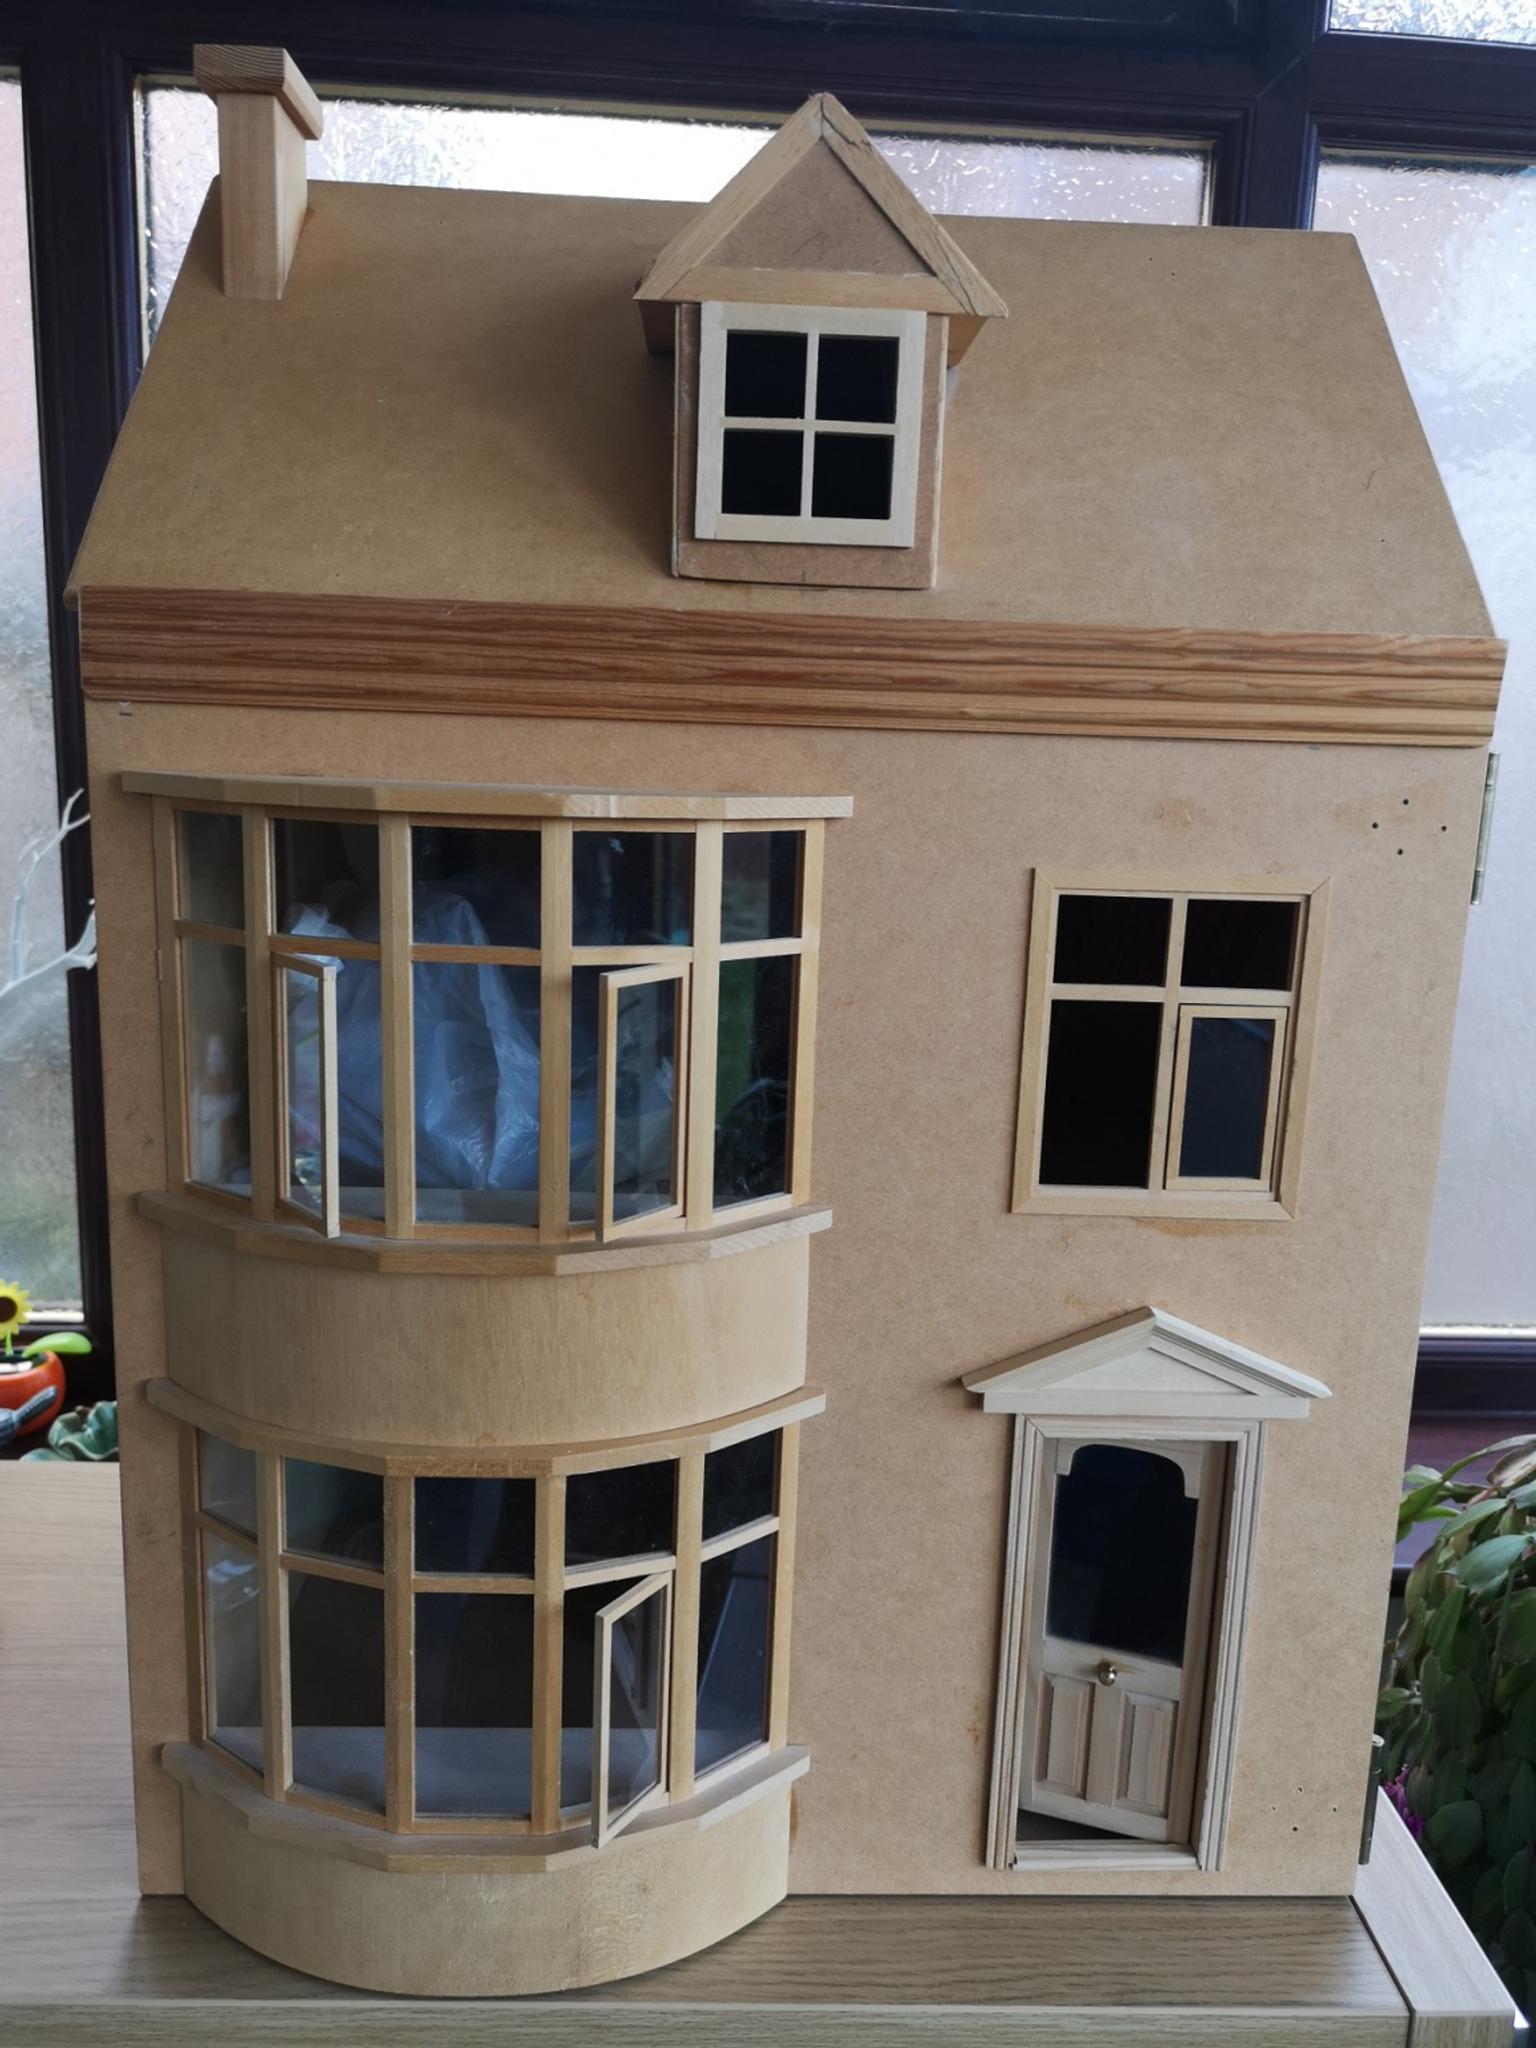 Doll's house. Hobbycraft 1/12th scale 